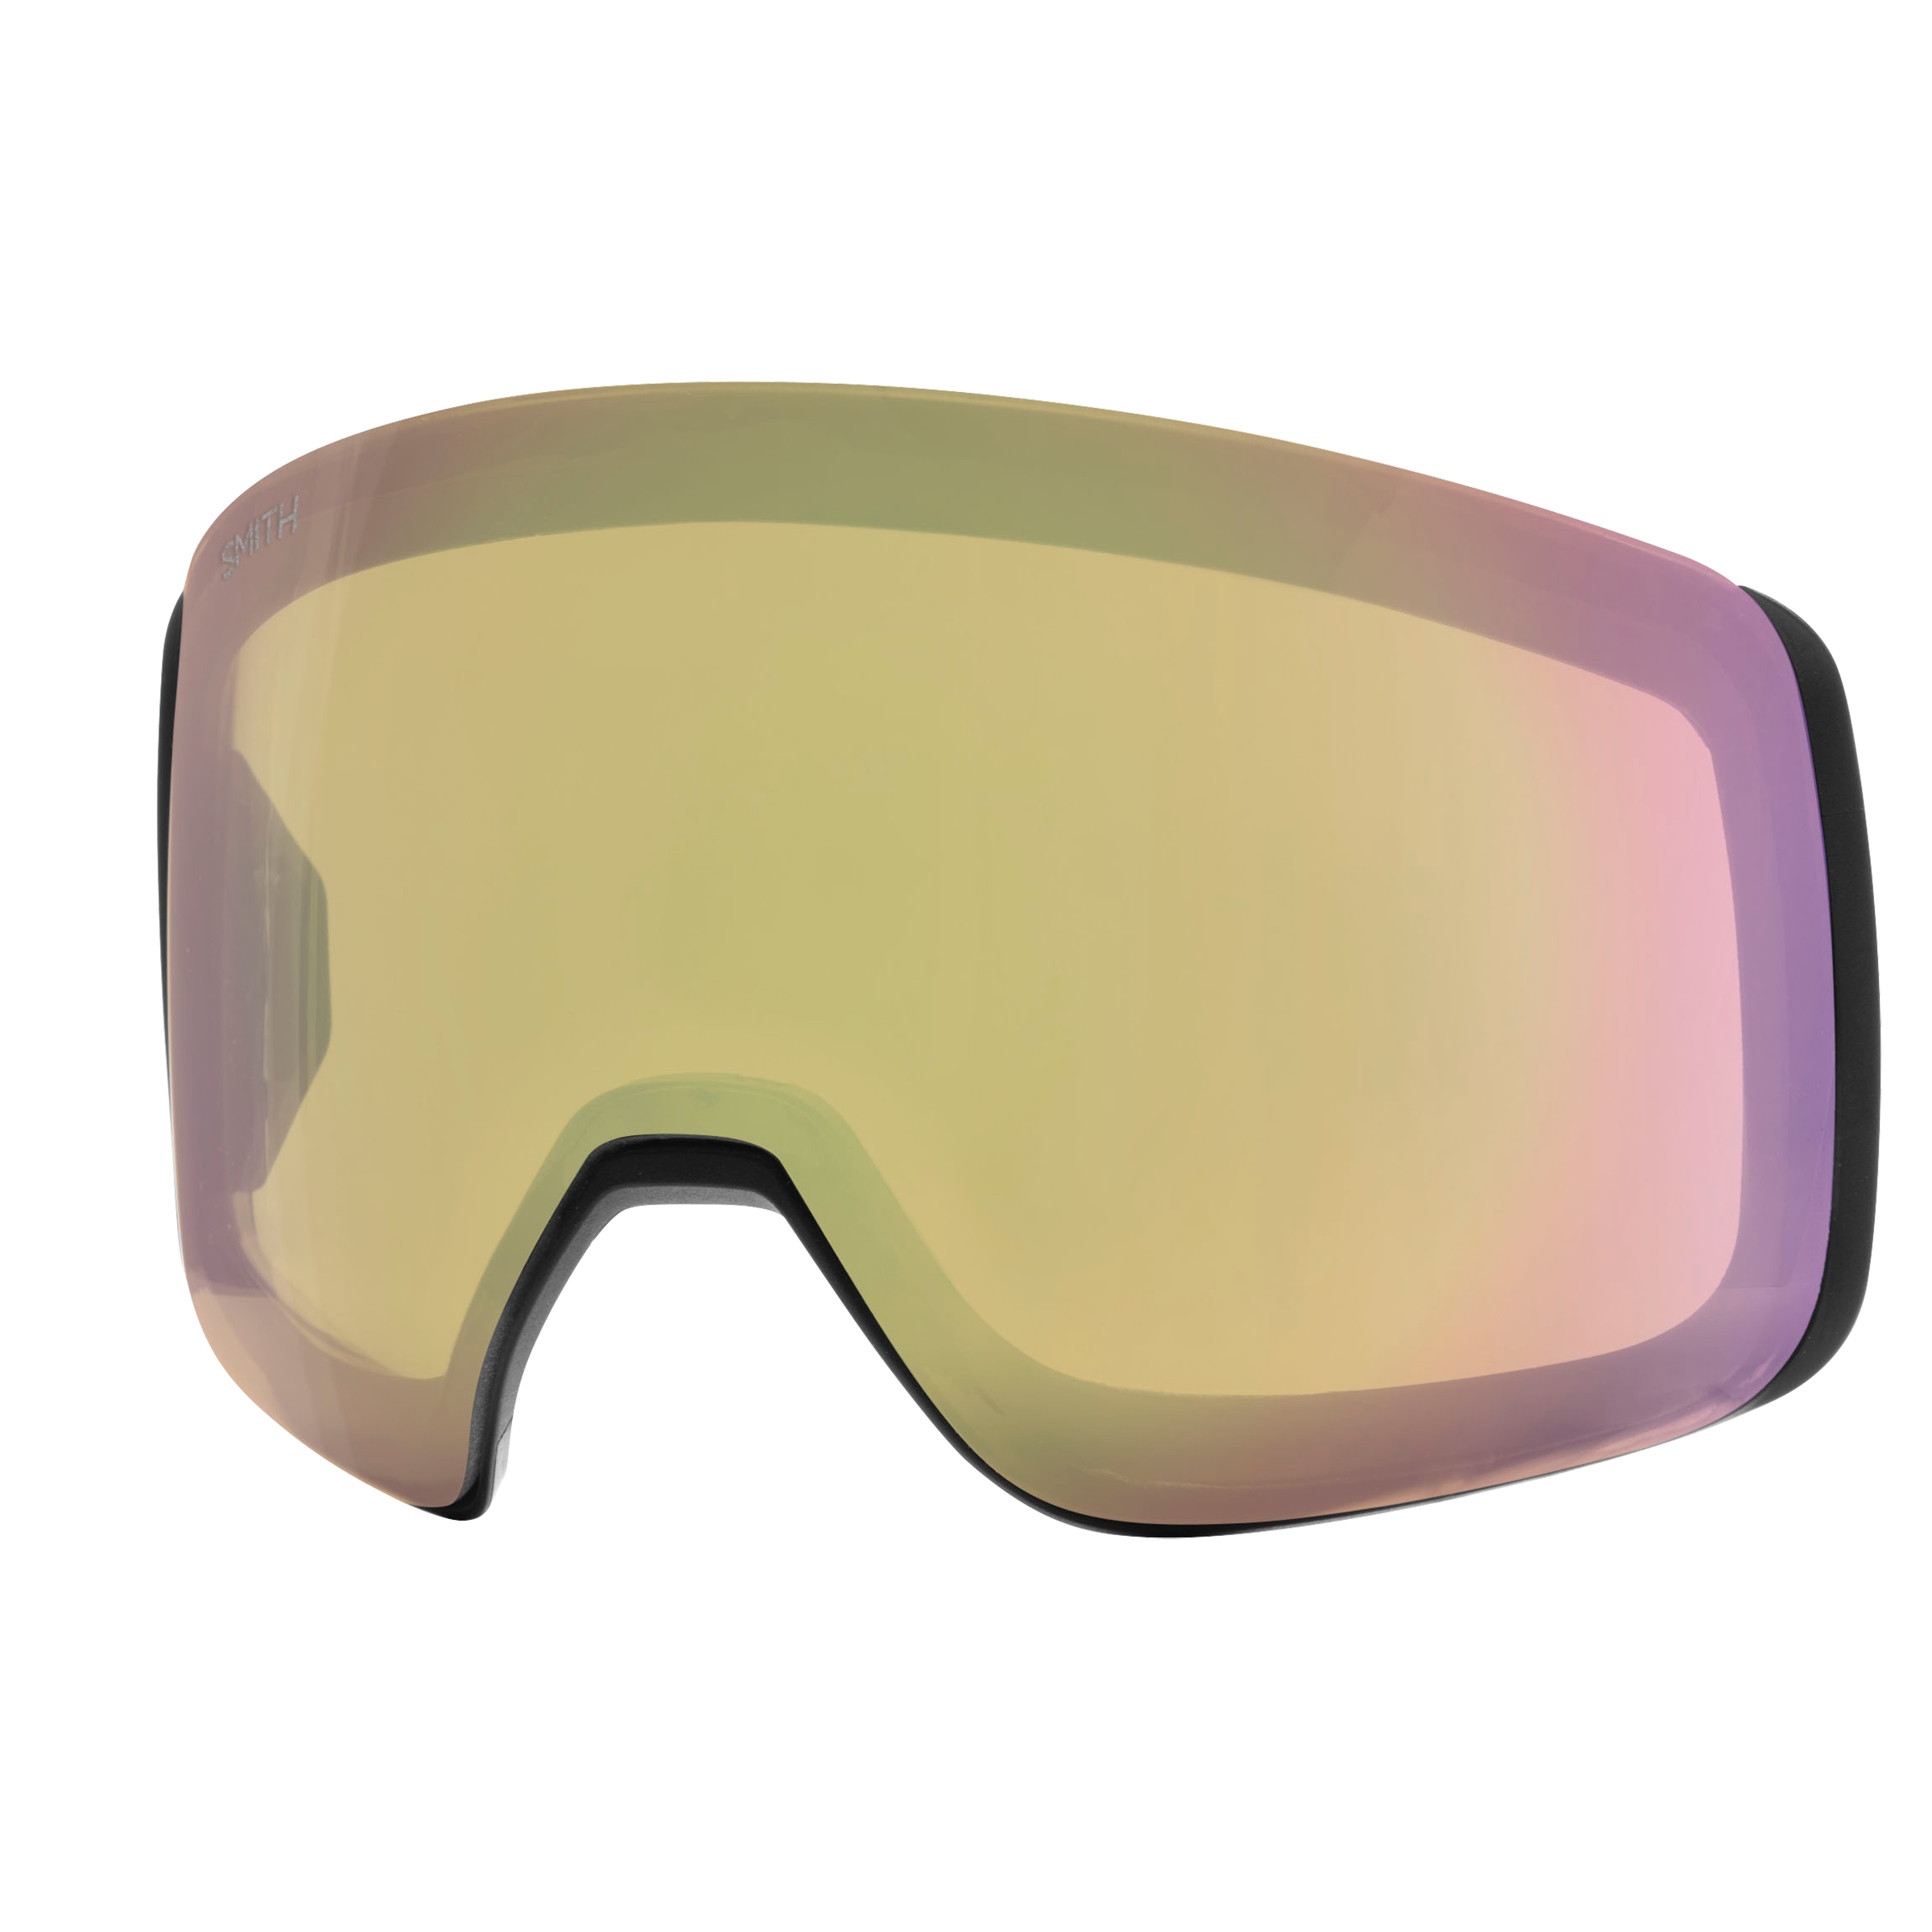 Buy 4D MAG Replacement Lens starting at USD 125.00 | Smith Optics